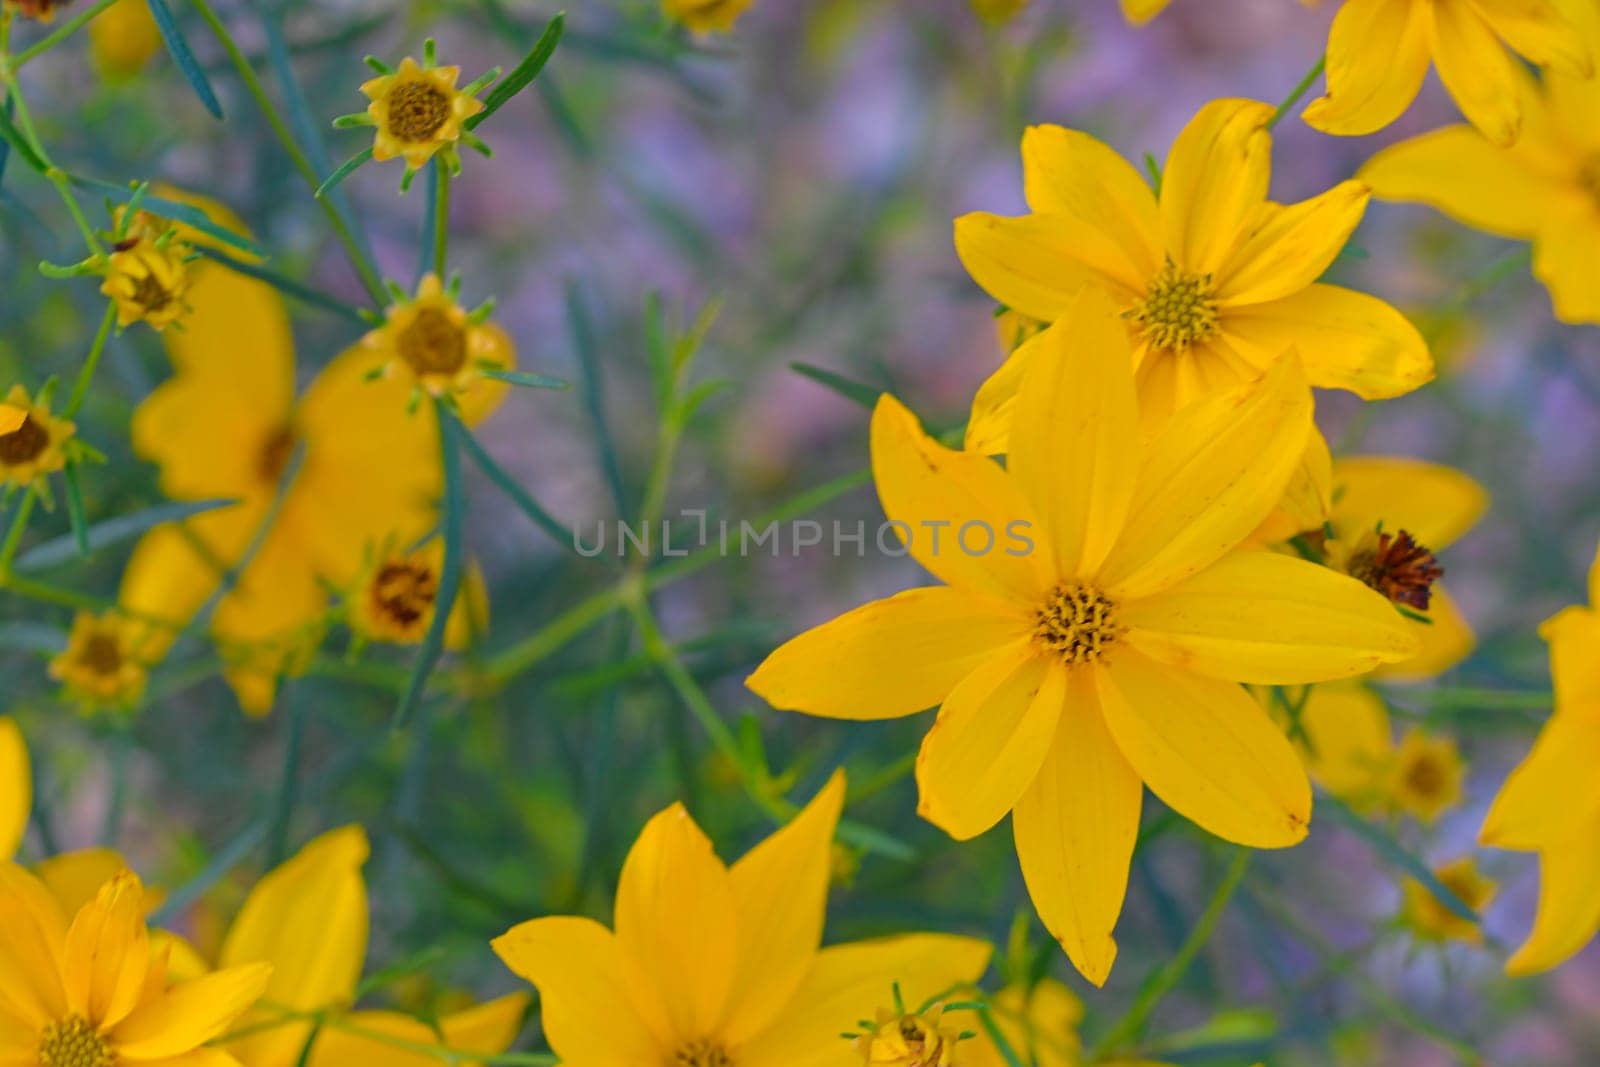 Coreopsis is a genus of flowering plants in the family Asteraceae. Common names include calliopsis and tickseed. There are 75 80 species of Coreopsis, all of which are native to North, Central, and South America. The name Coreopsis is derived from the Ancient Greek by roman_nerud